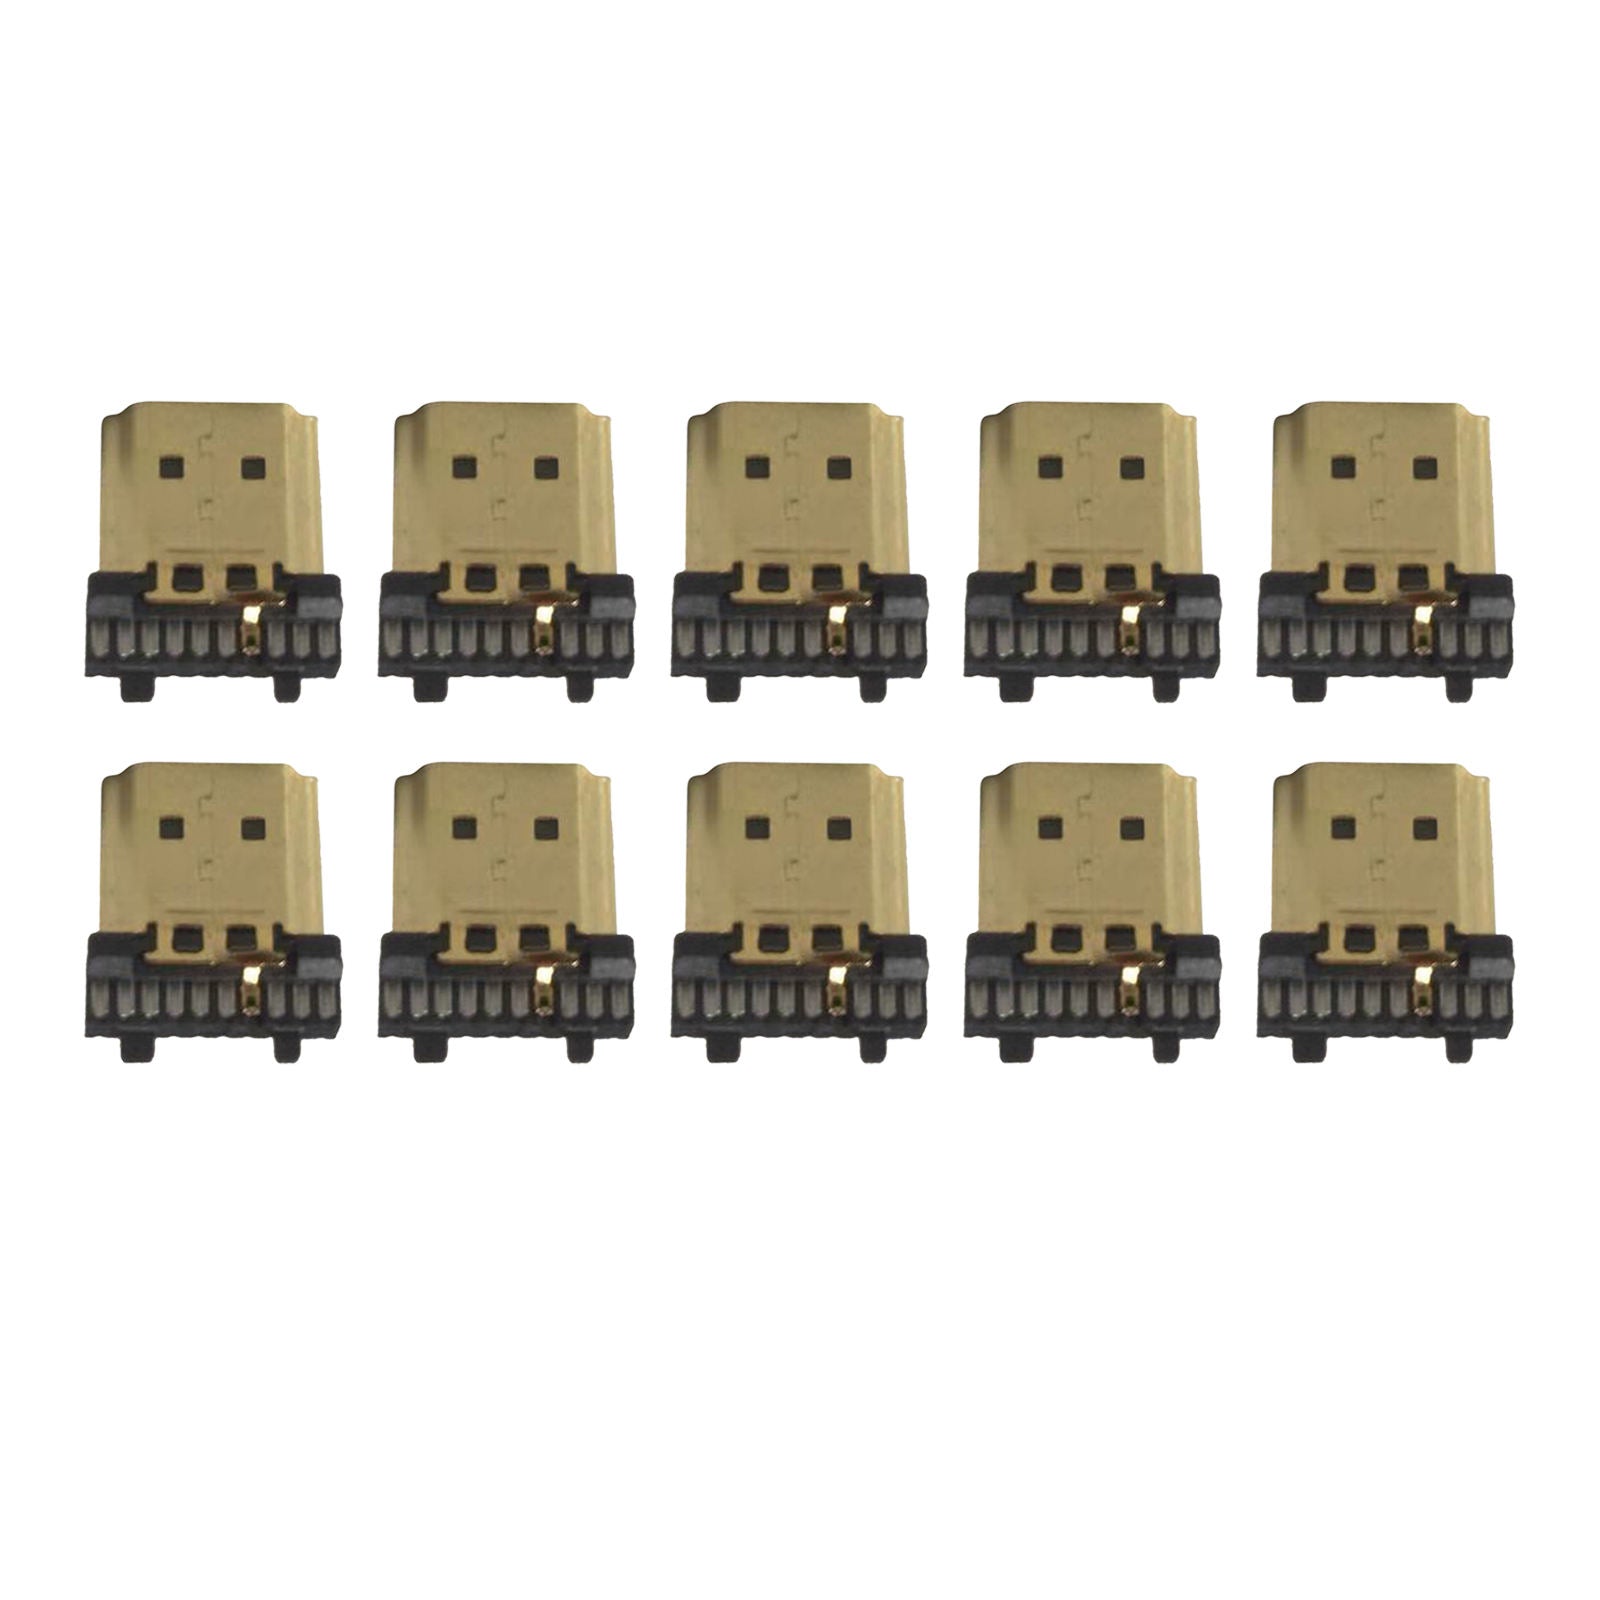 10 Pieces HDMI Male 19Pin Connectors Jack Termination Replacement Kit